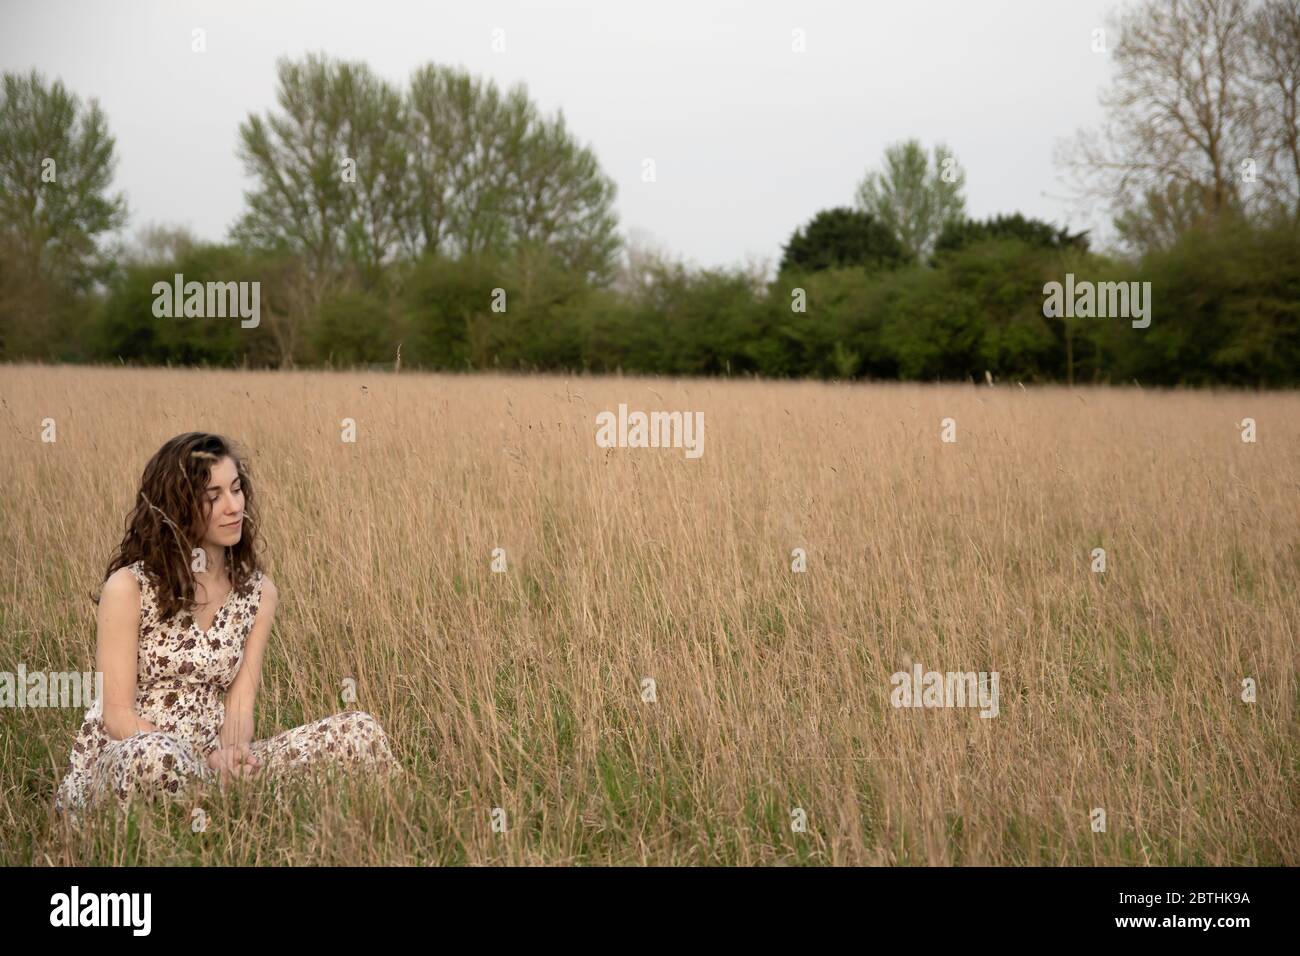 A beautiful and healthy young woman in a dress dances stands peacefully meditating and thinking in a brown grass field at sunset Stock Photo